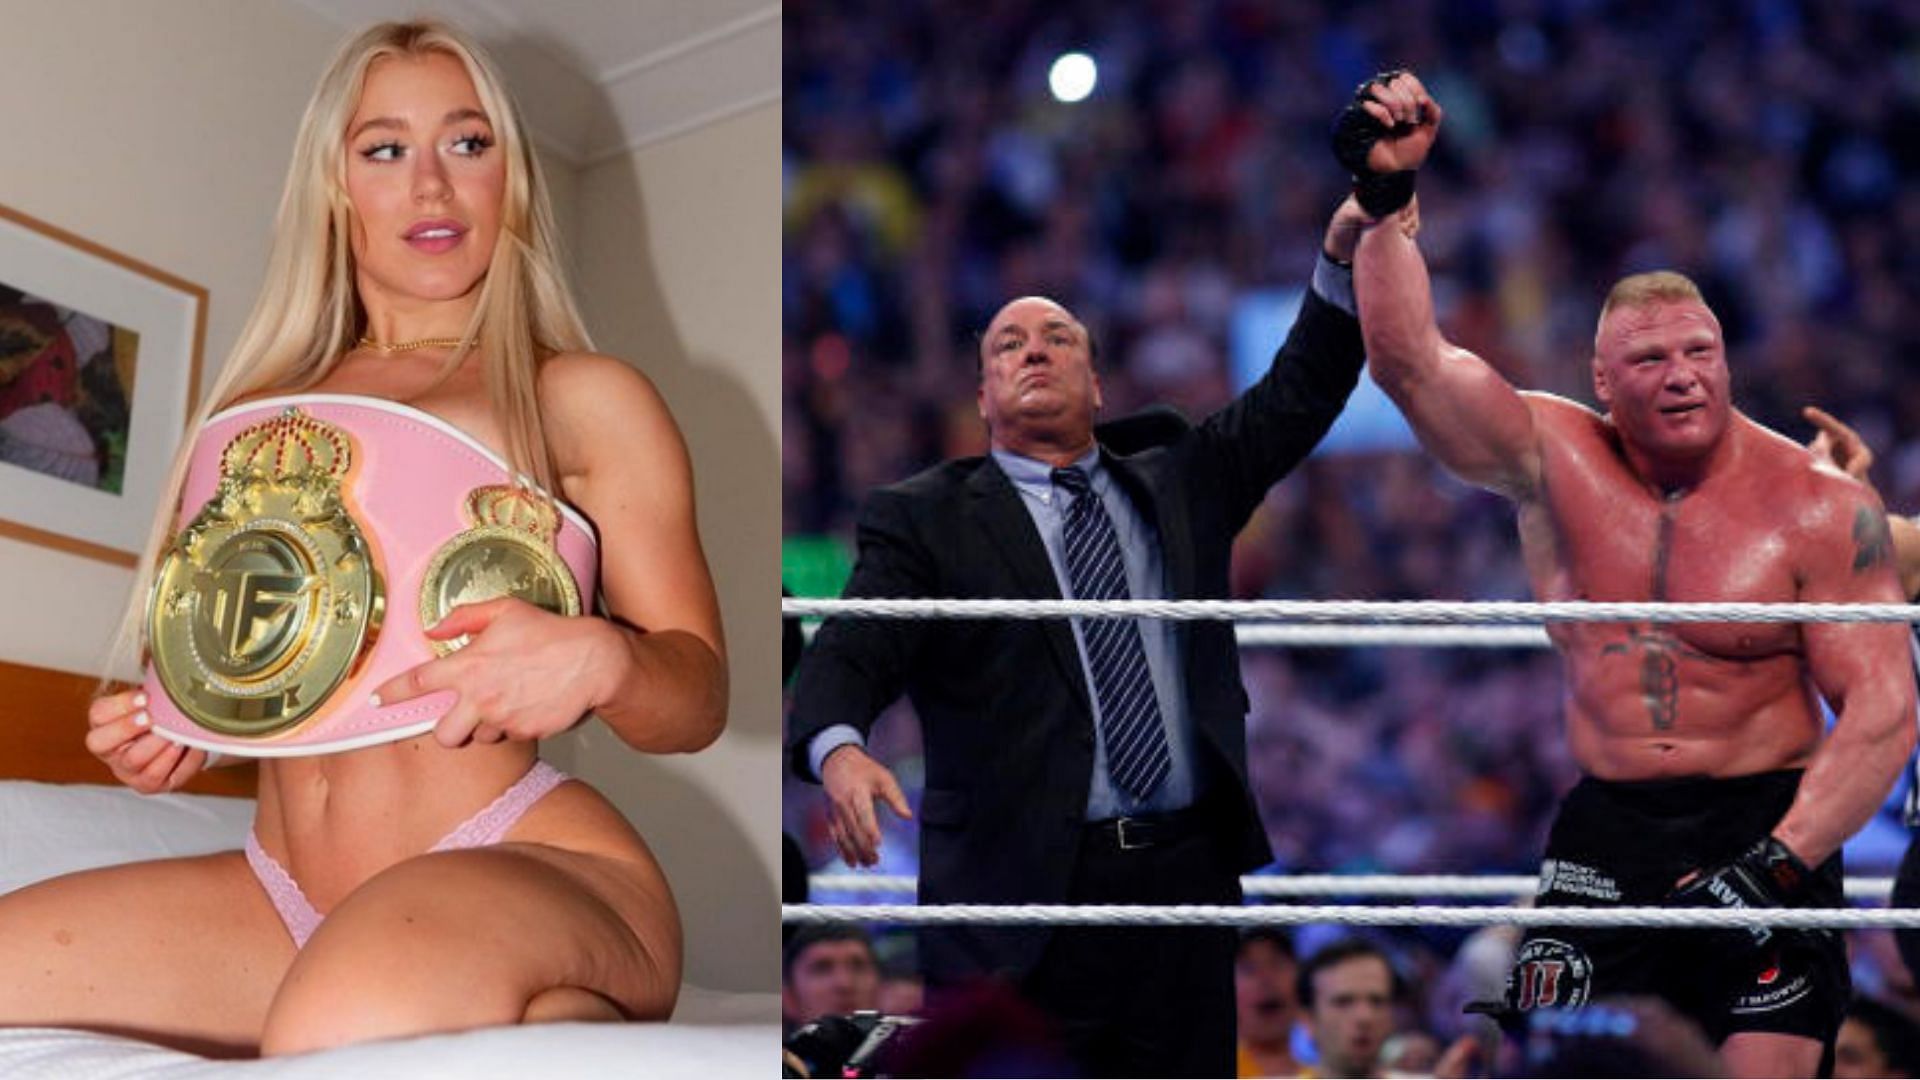 When Elle Brooke (left) revealed she once contacted Brock Lesnar &amp; Paul Heyman (right) to try and secure a ring walk [Images courtesy of @thedumbledong &amp; Getty Images]